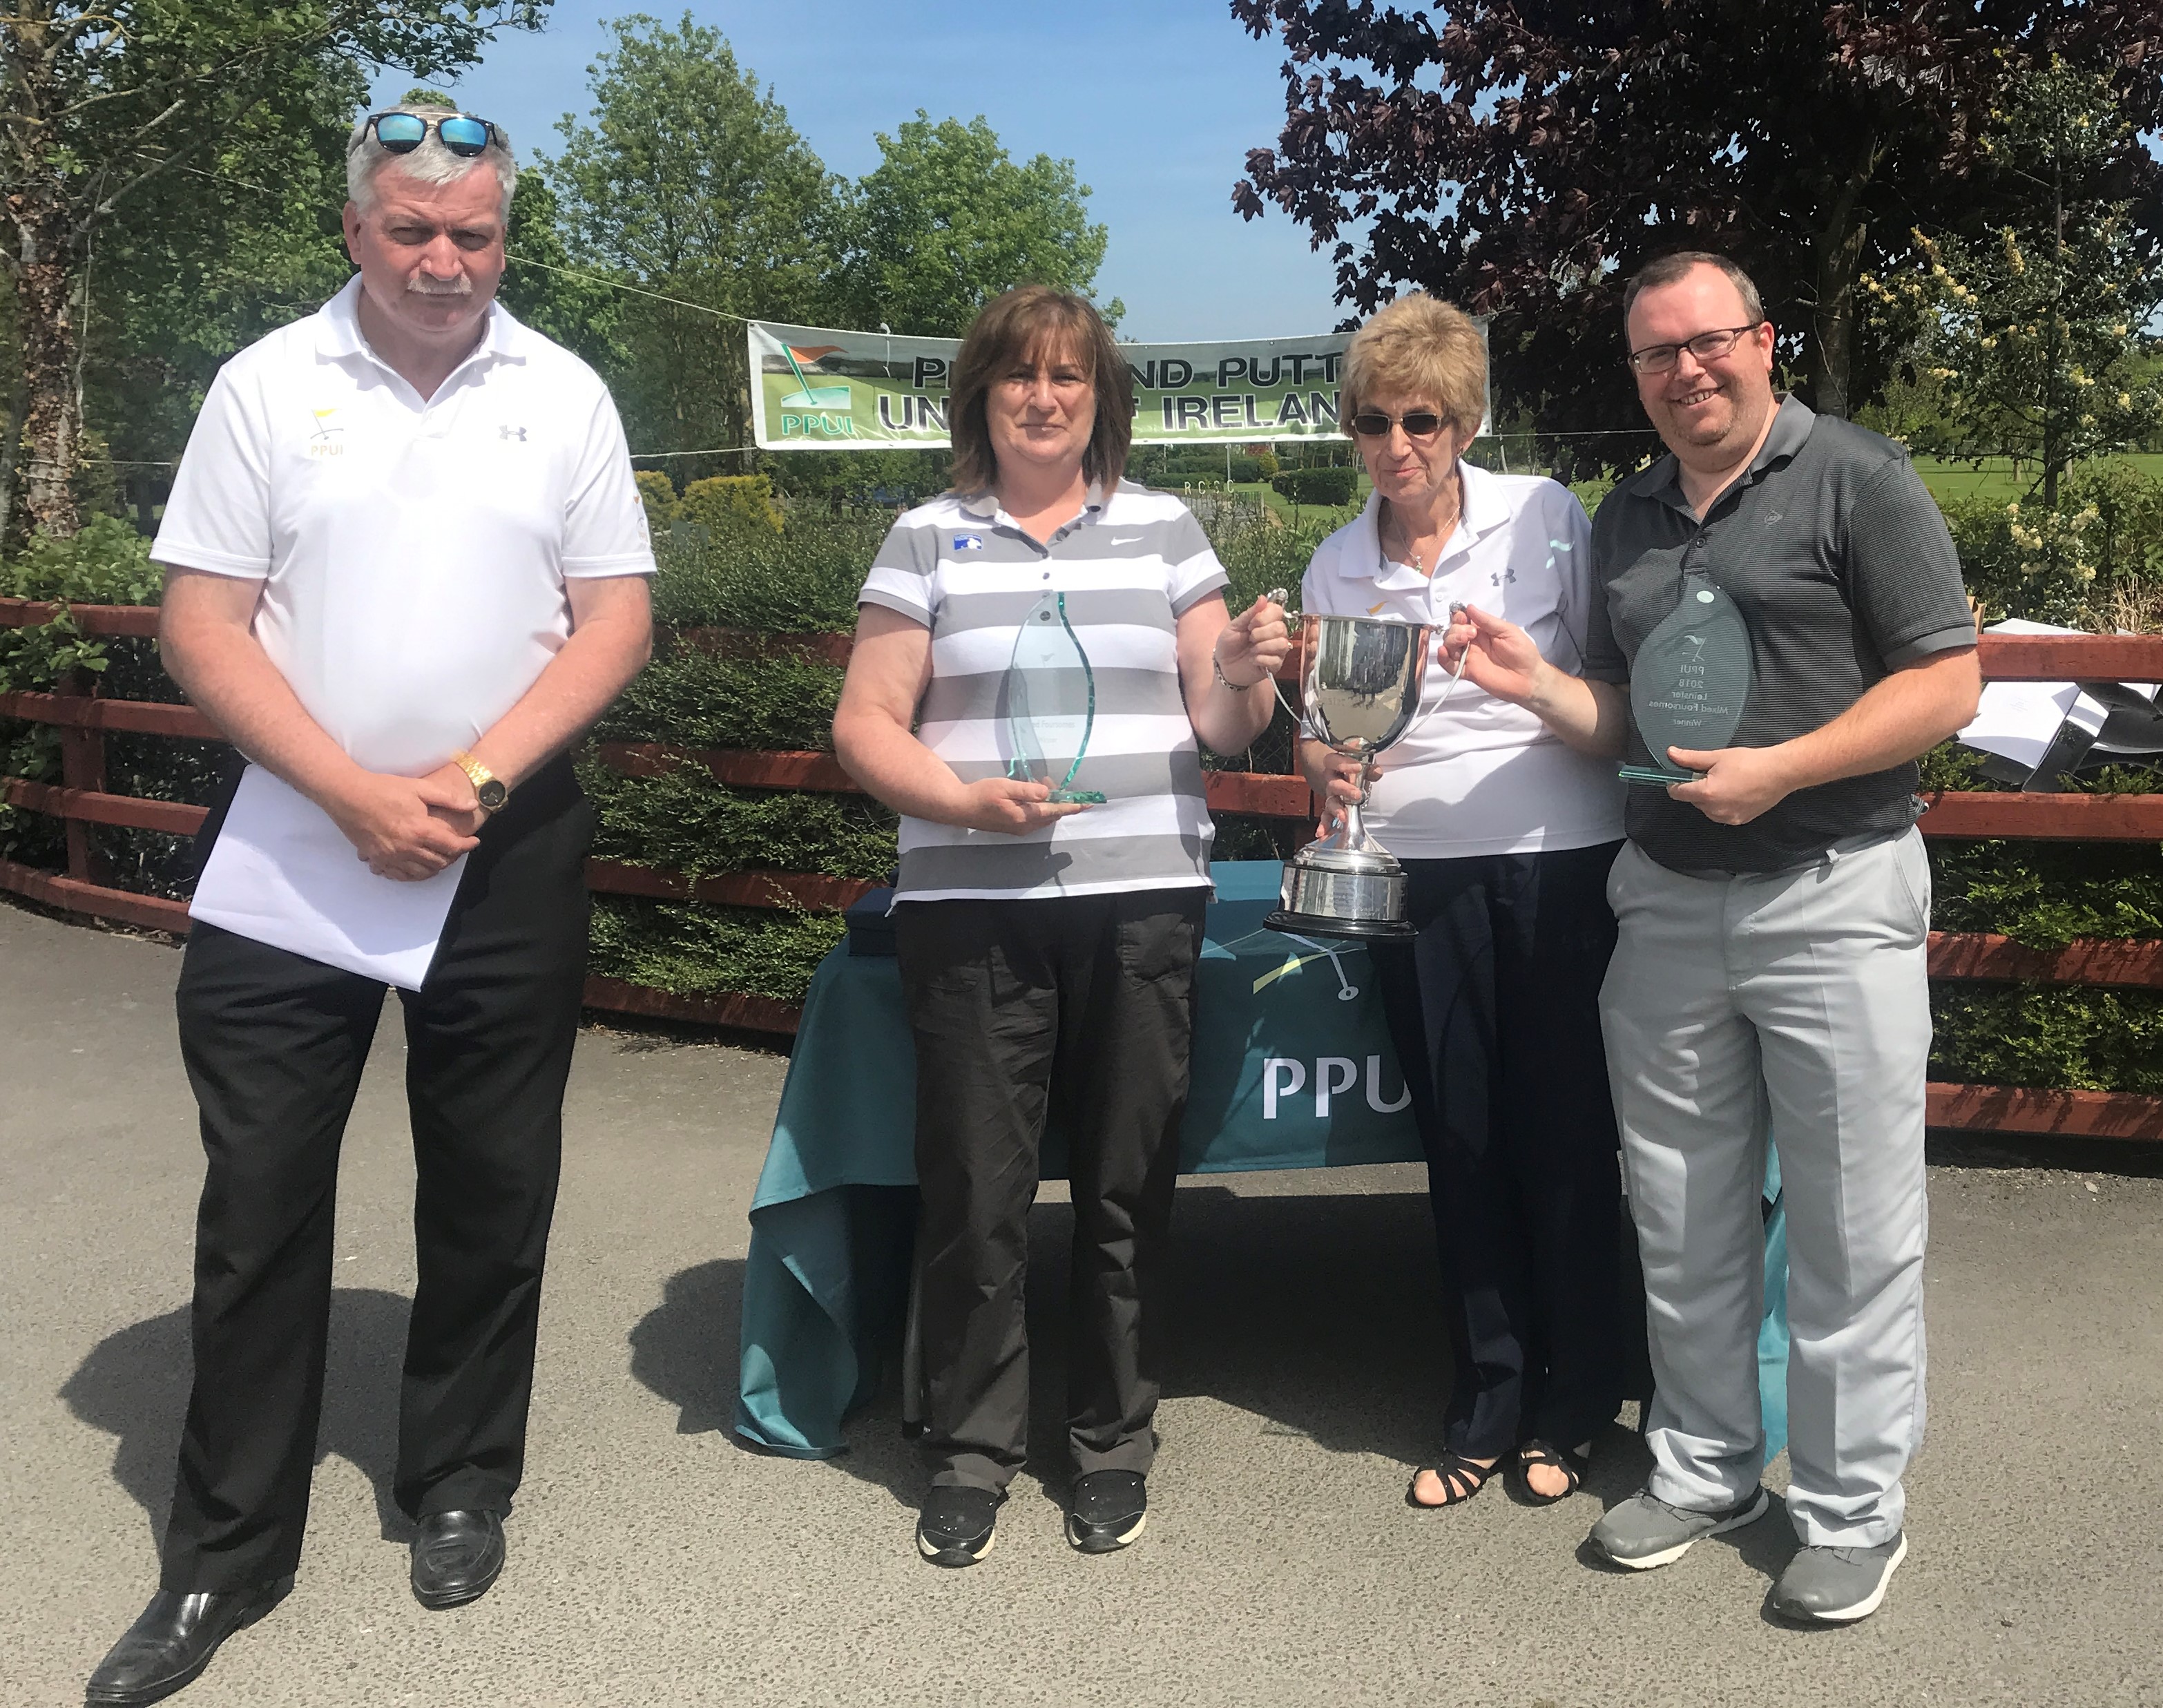 2018 Provincial Mixed Foursomes Report